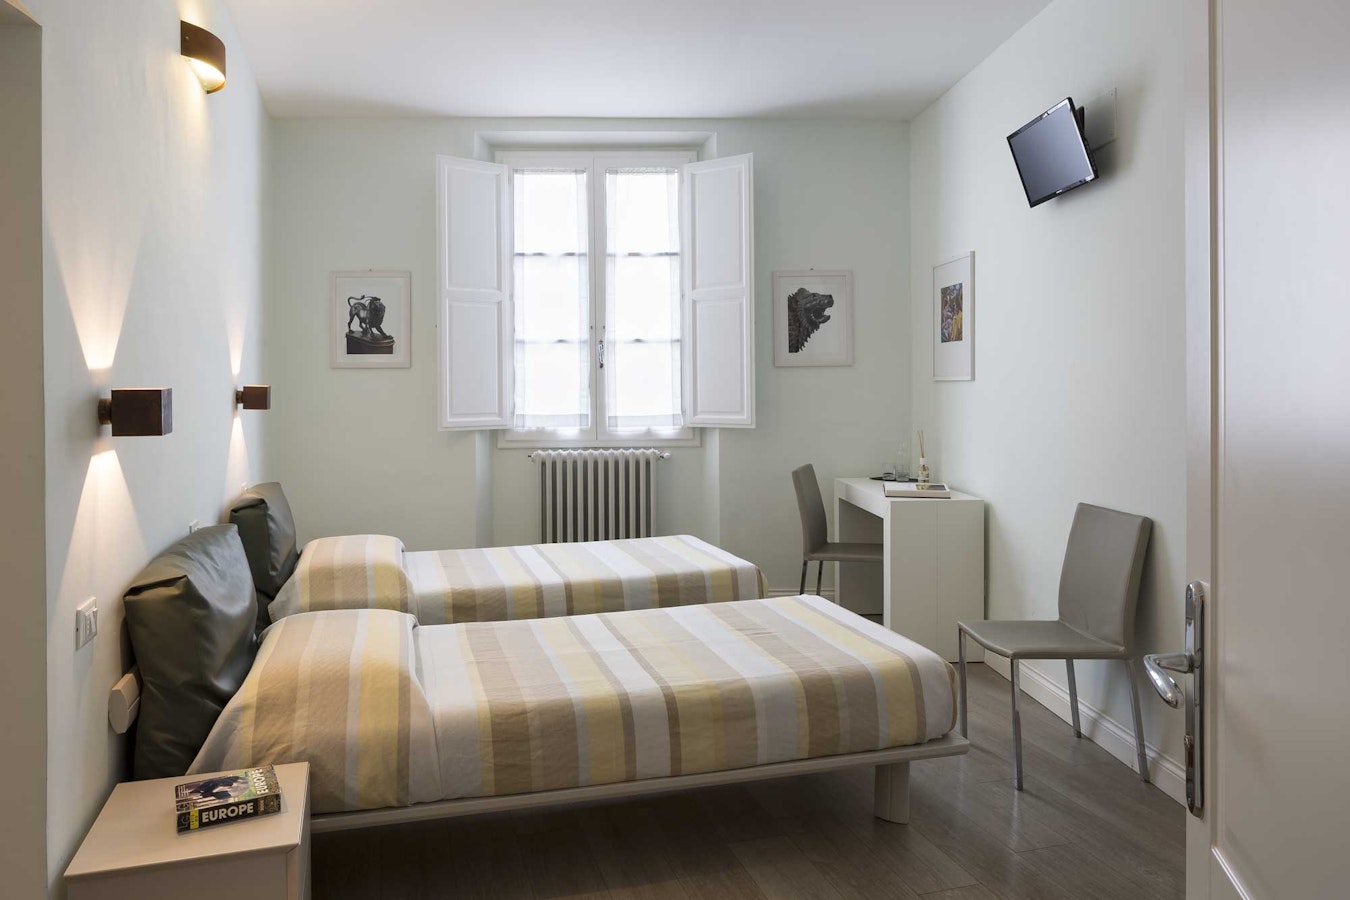 Casa Rovai: B&B in Florence, Italy with free breakfast & AC